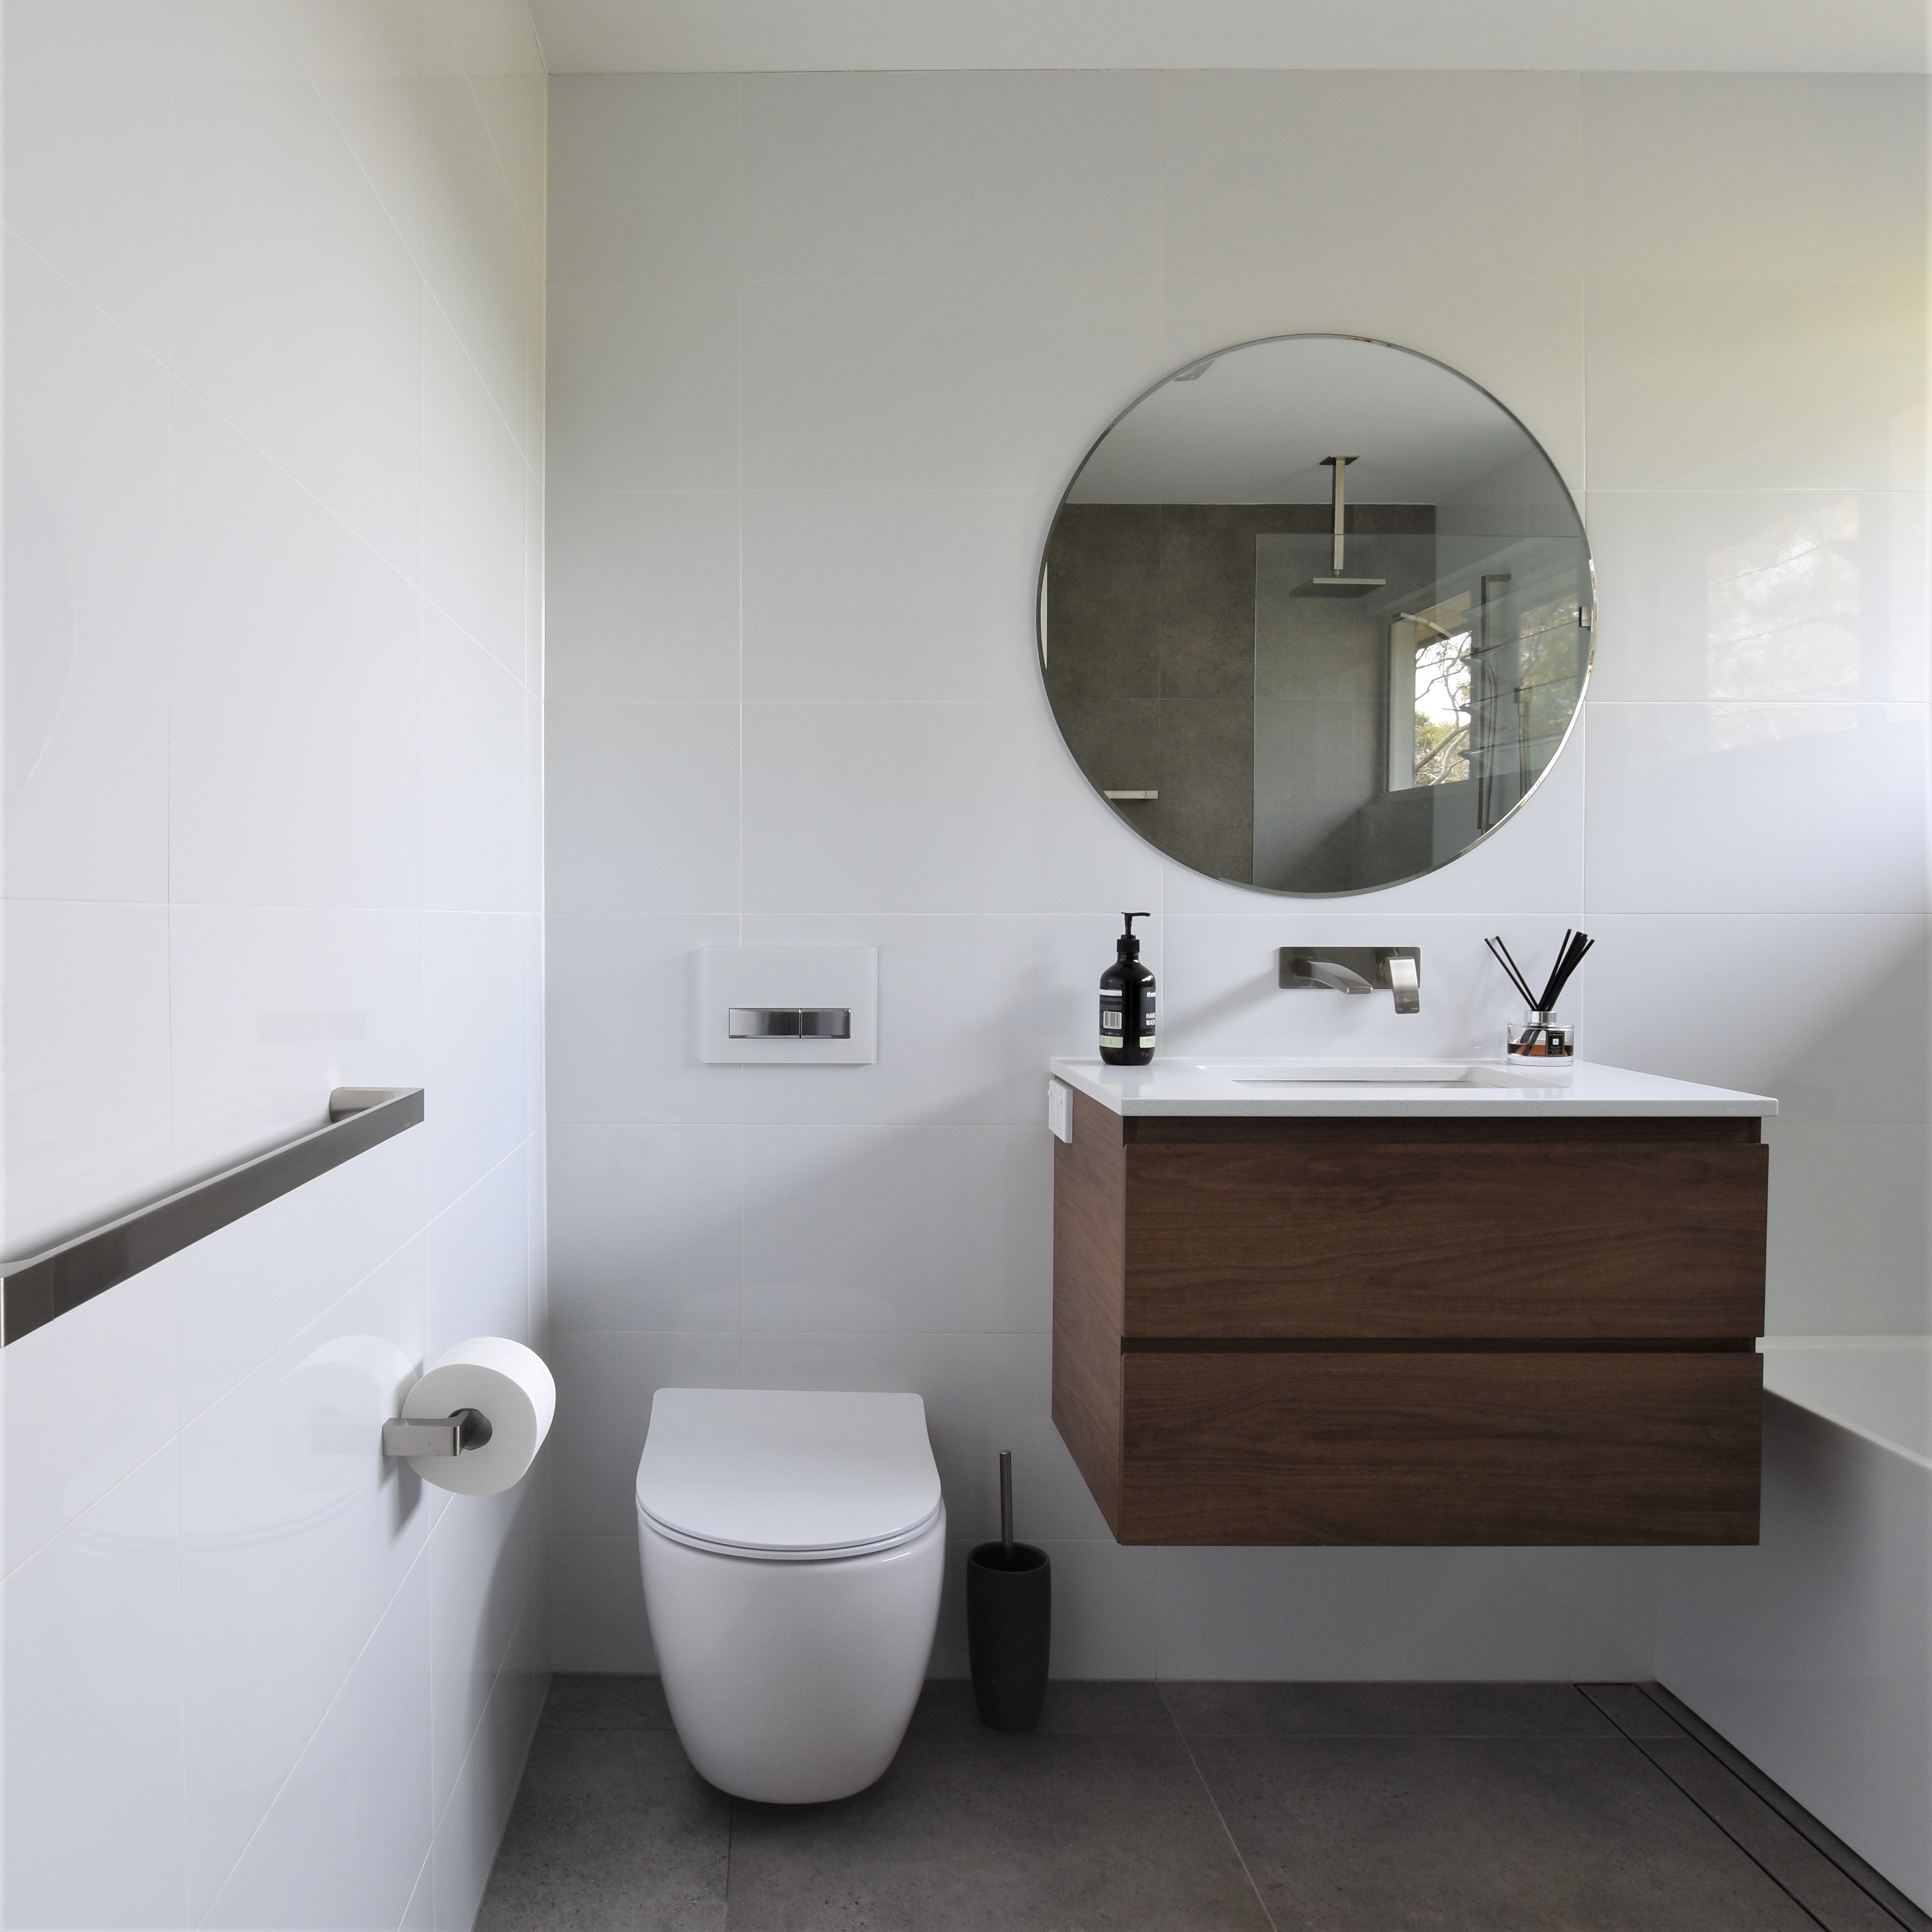 This bathroom features a toilet with a cistern behind the wall, making it better for cleaning